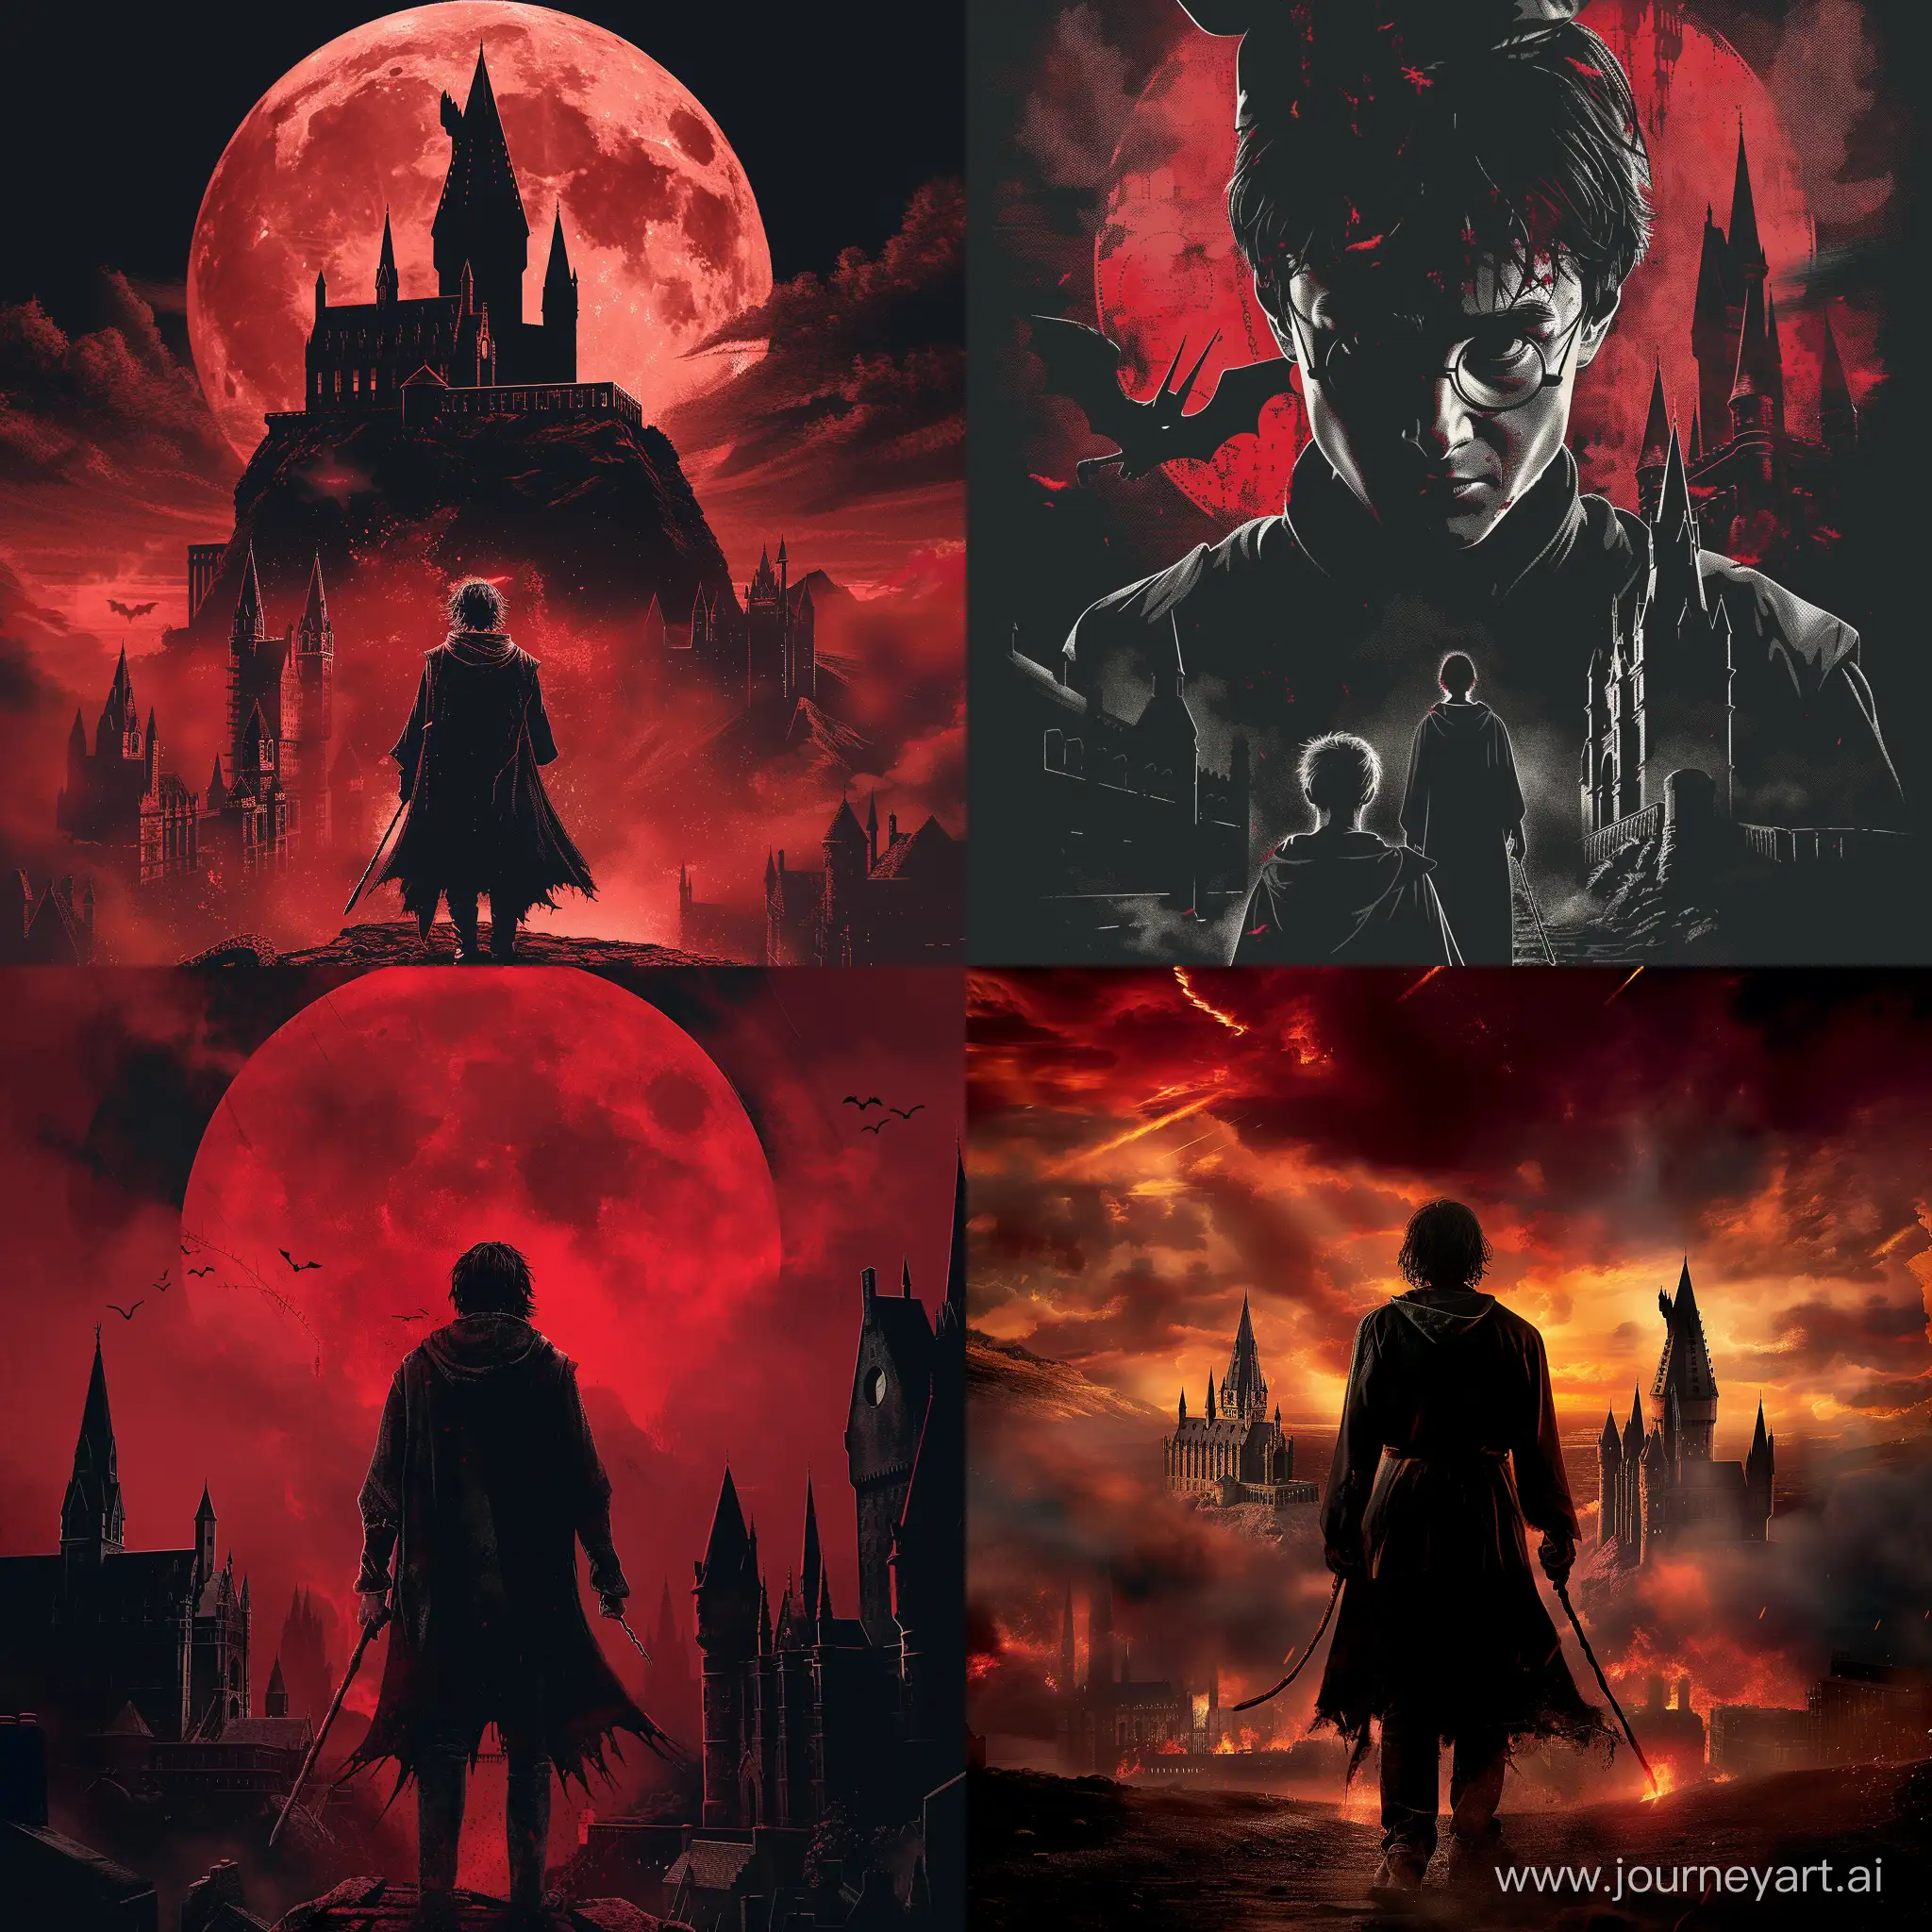 Magical-Wizardry-Meets-Gothic-Fantasy-Harry-Potter-Poster-in-Bloodborne-Style